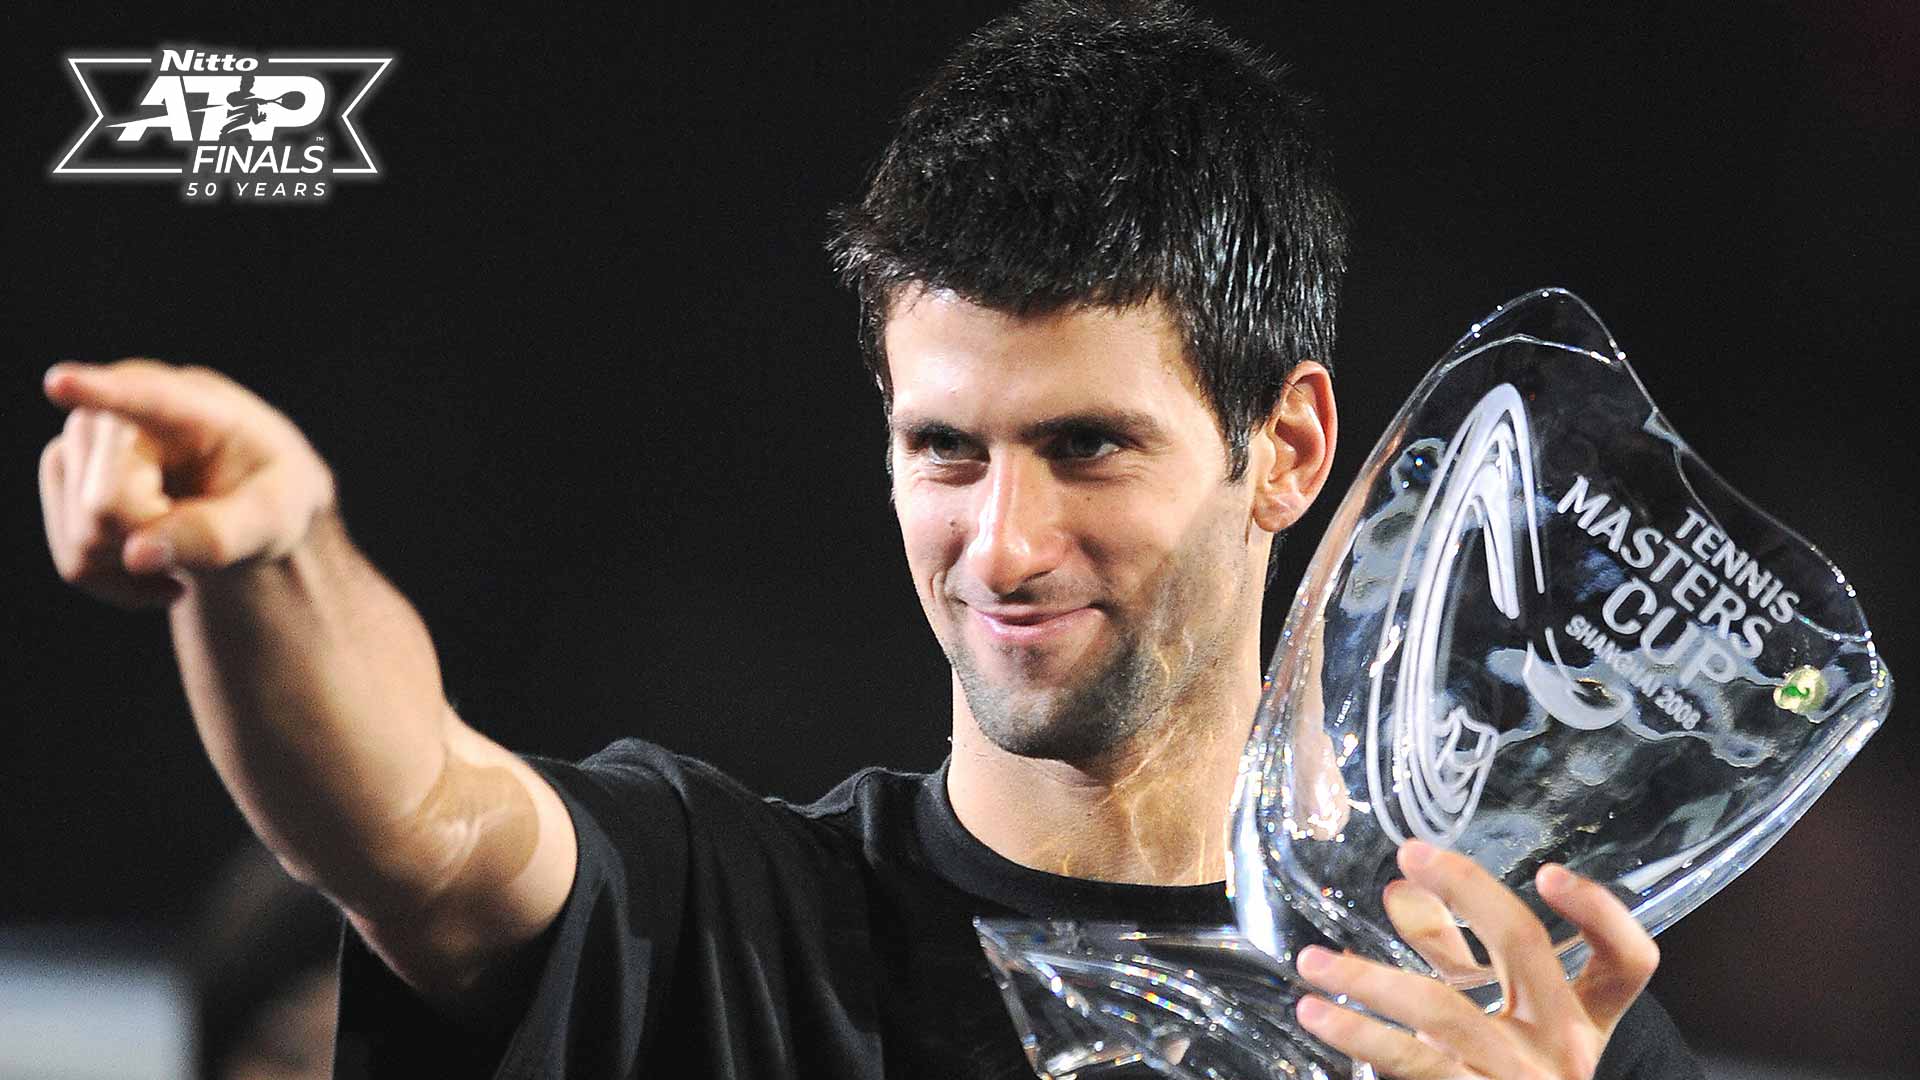 Novak Djokovic claimed the first of his five Nitto ATP Finals titles in Shanghai in 2008.